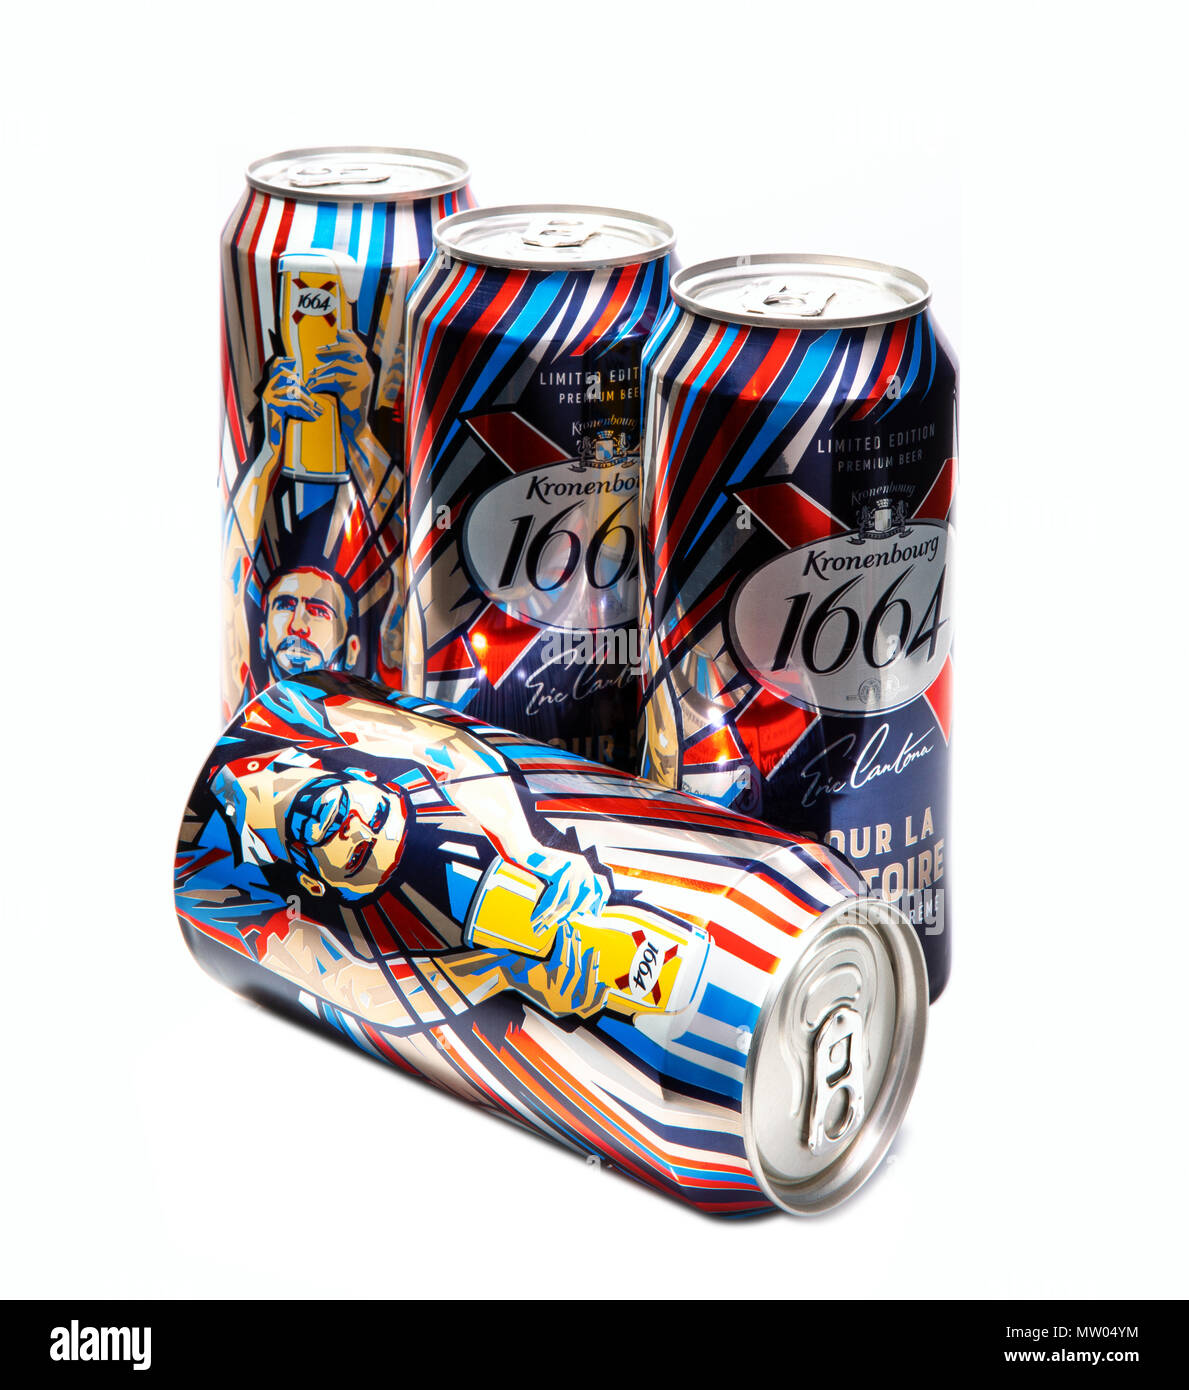 SWINDON, UK - MAY 28, 2018: 4 Cans of Kronenbourg 1664 limited edition Eric Cantona pour la victoire lager on a white background. Stock Photo